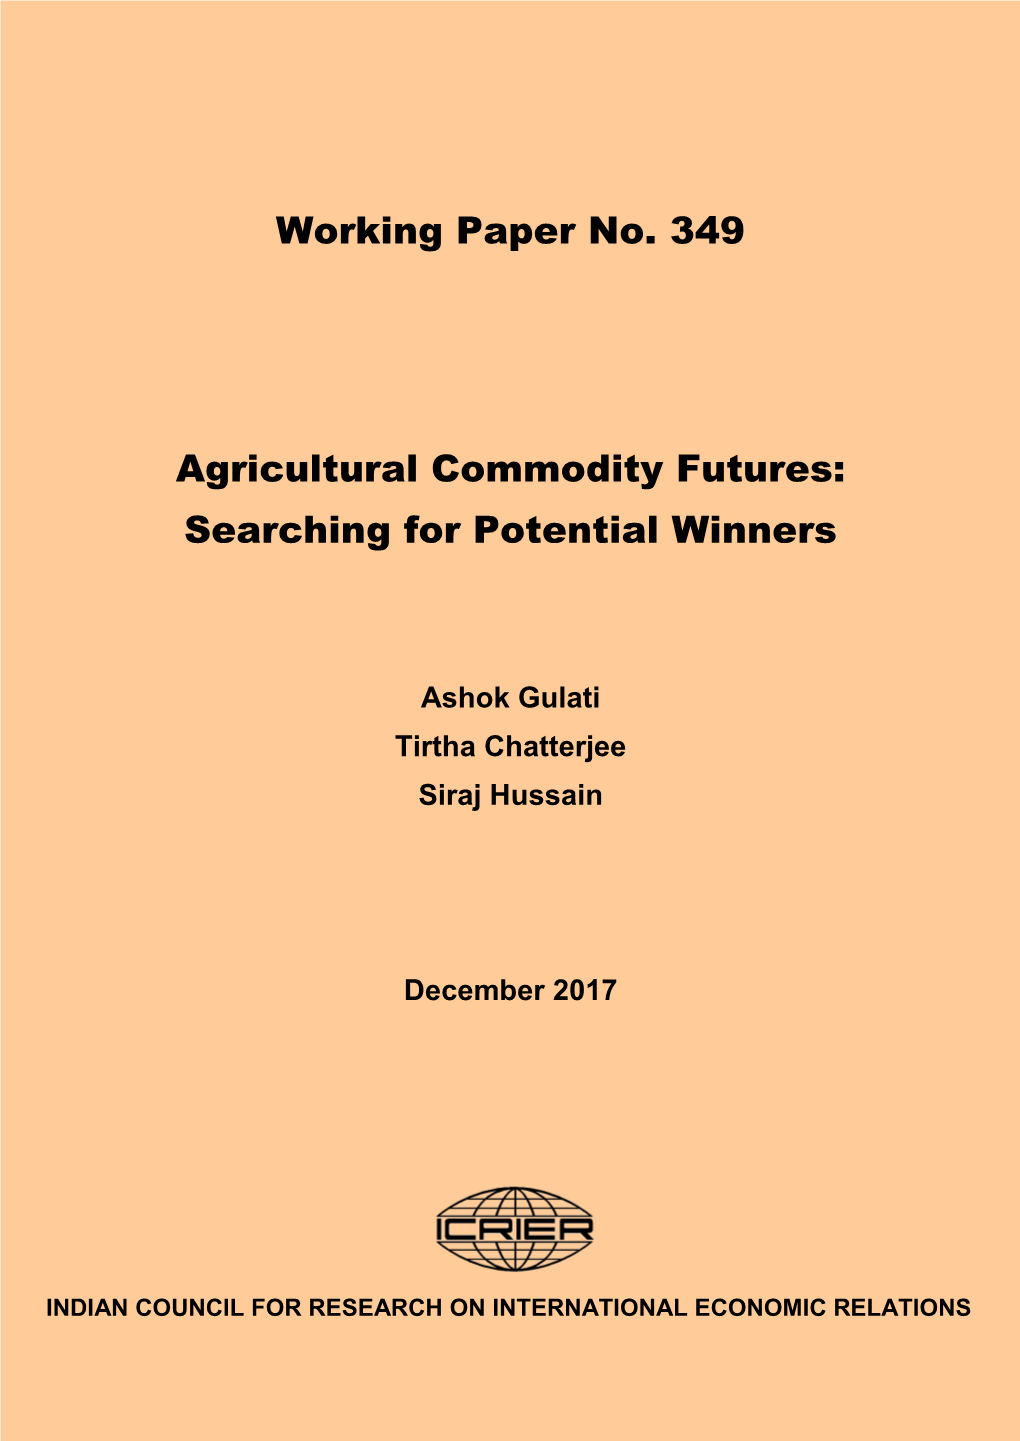 Agricultural Commodity Futures: Searching for Potential Winners